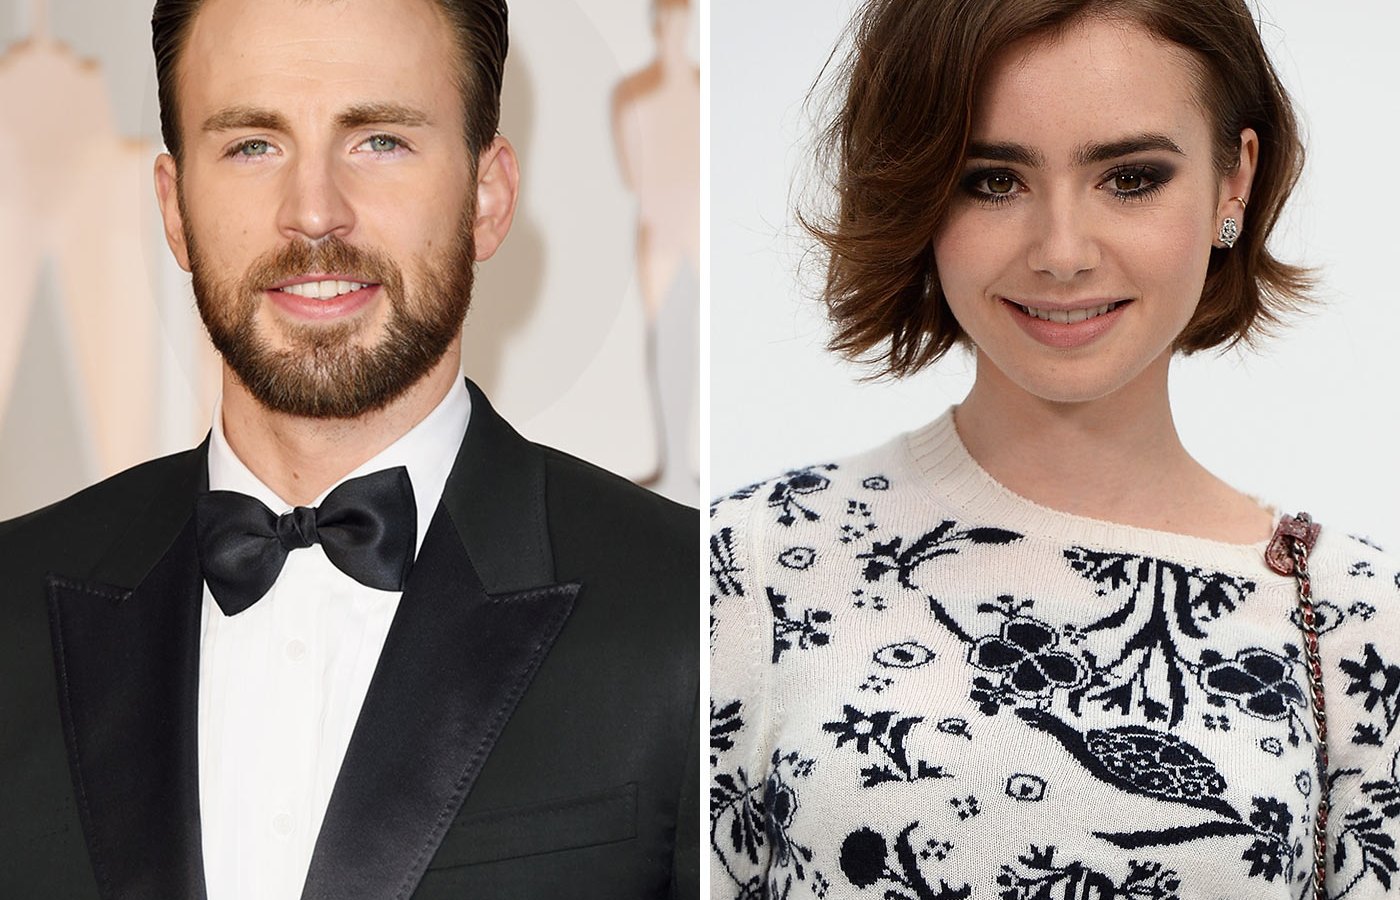 Chris Evans and Lily Collins